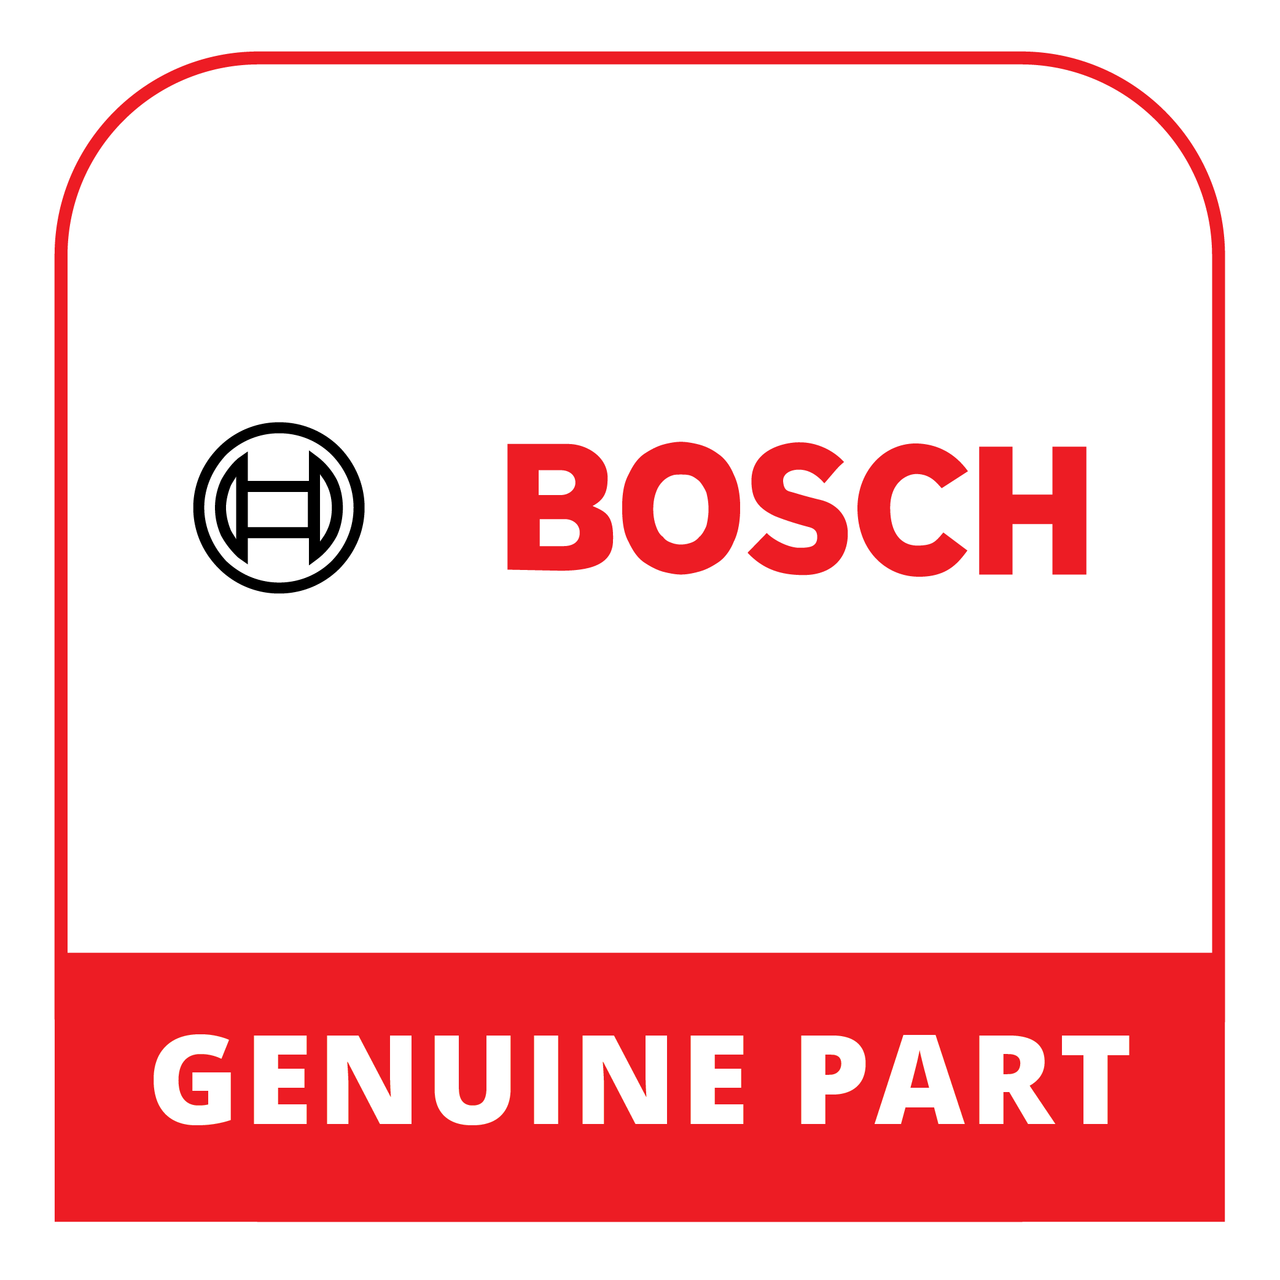 Bosch (Thermador) 10029009 - Back Wall Panel - Genuine Bosch (Thermador) Part